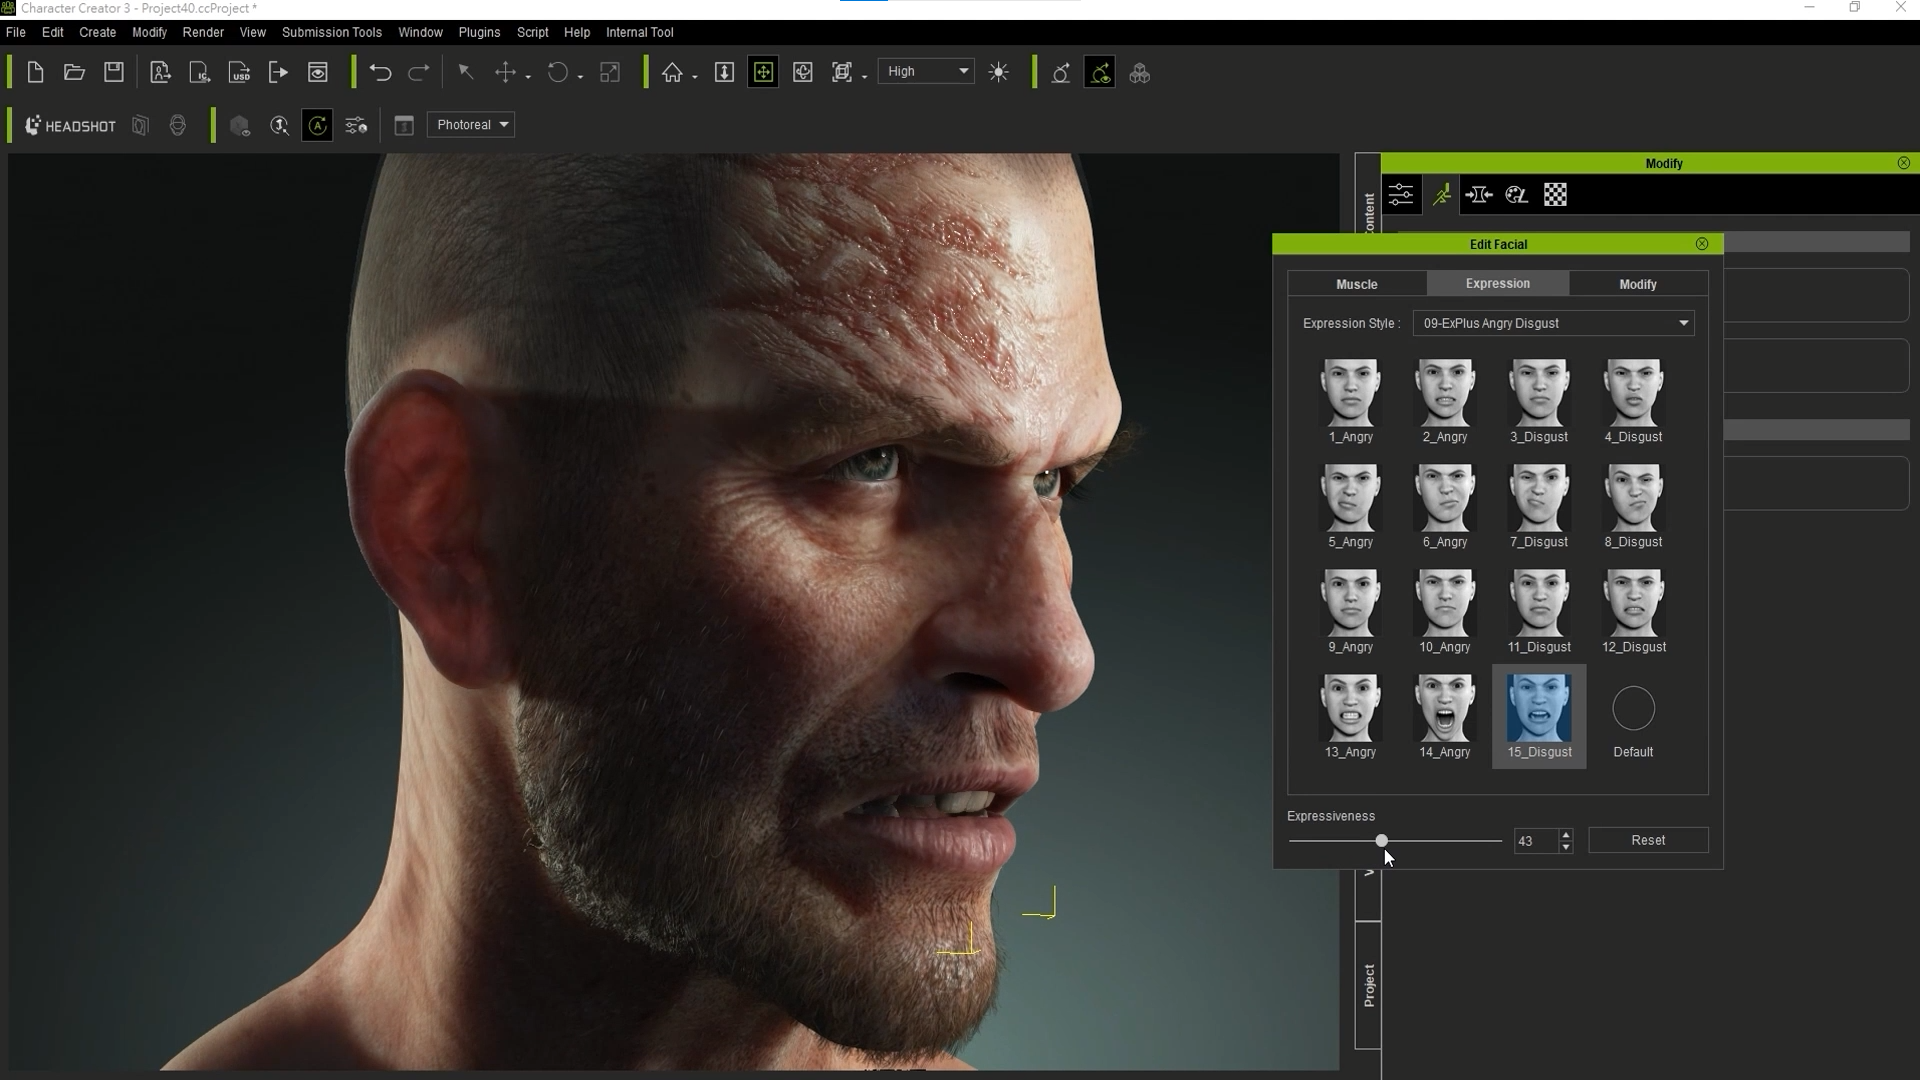 How you can get access to these Hollywood-style digital make-up effects 4